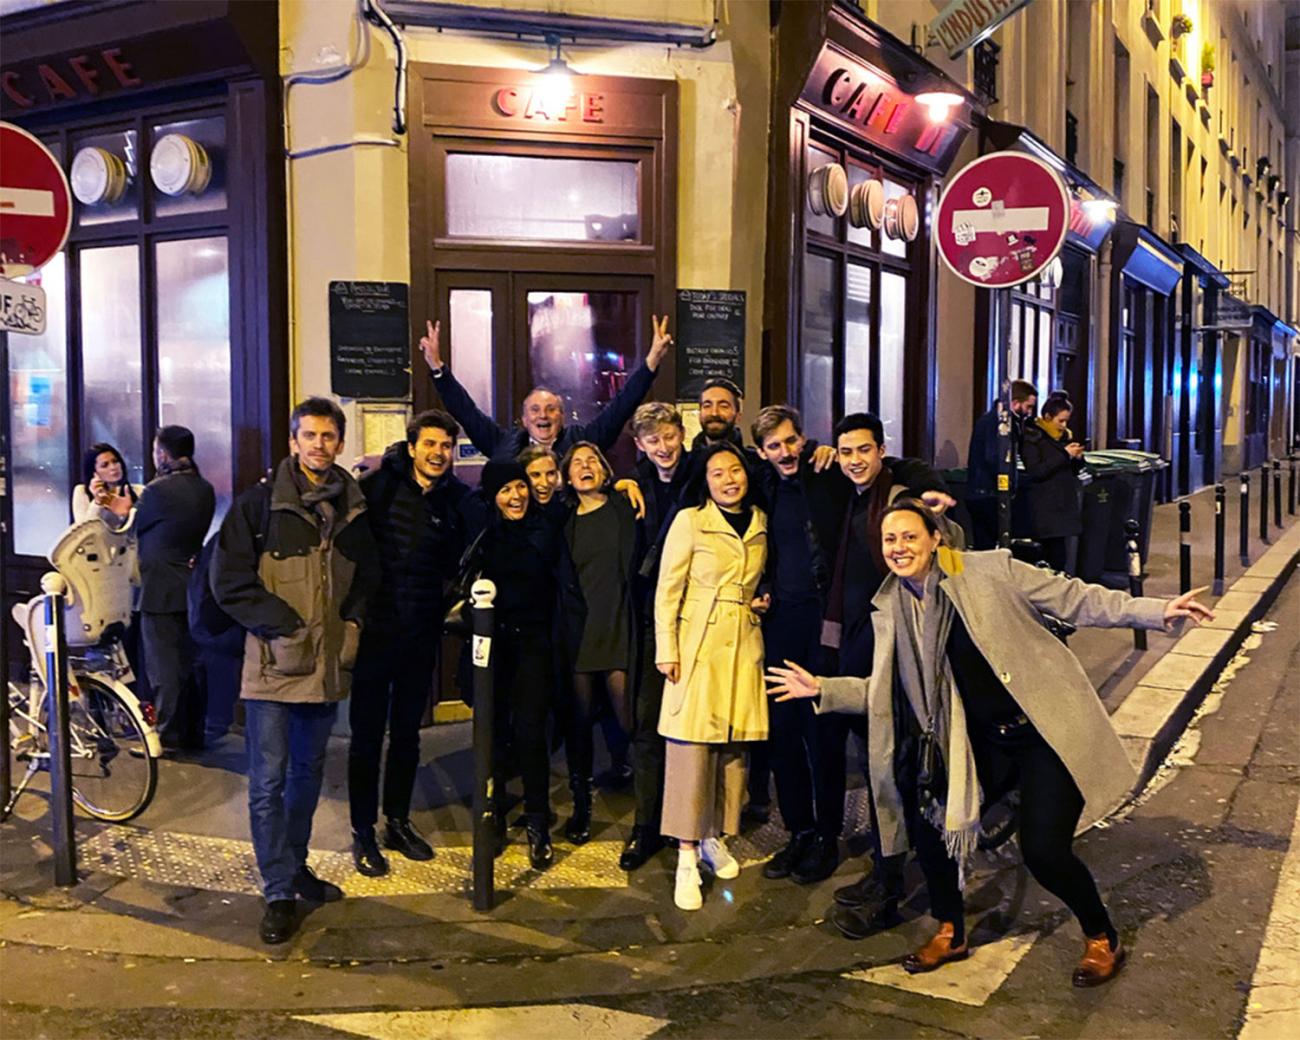 Group photo in front of a cafe in Paris